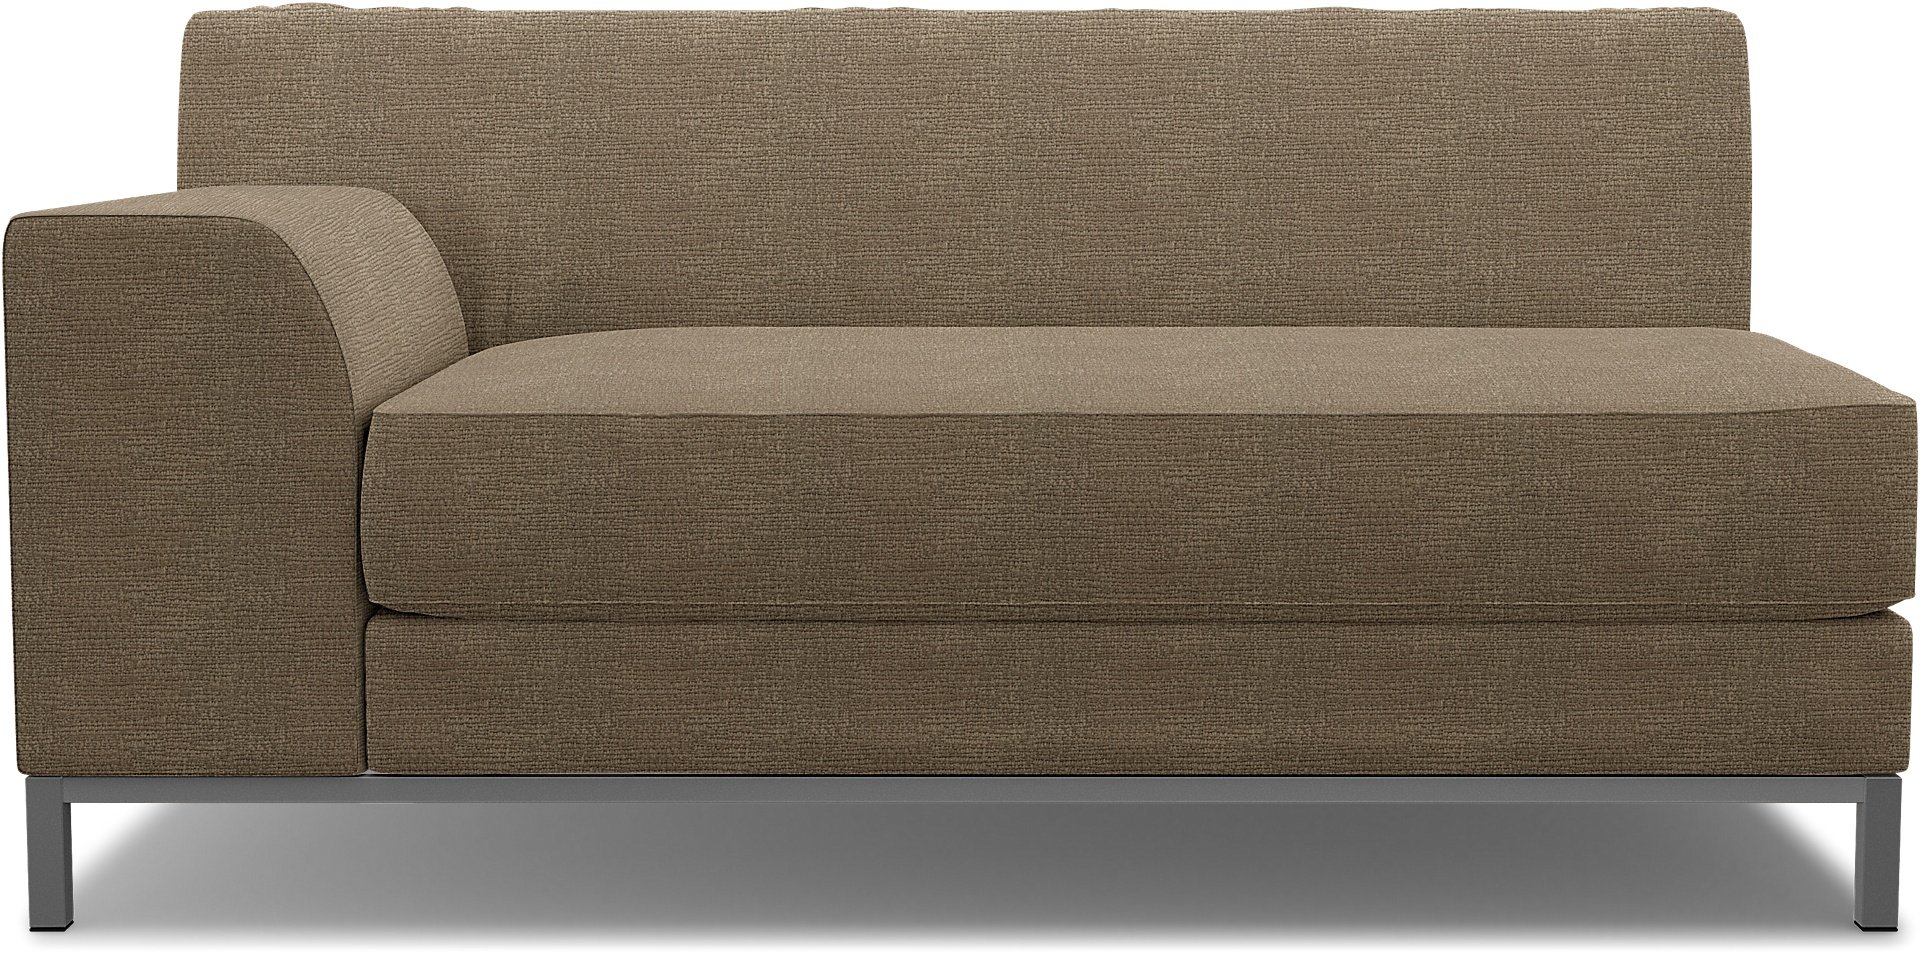 IKEA - Kramfors 2 Seater Sofa with Left Arm Cover, Camel, Boucle & Texture - Bemz